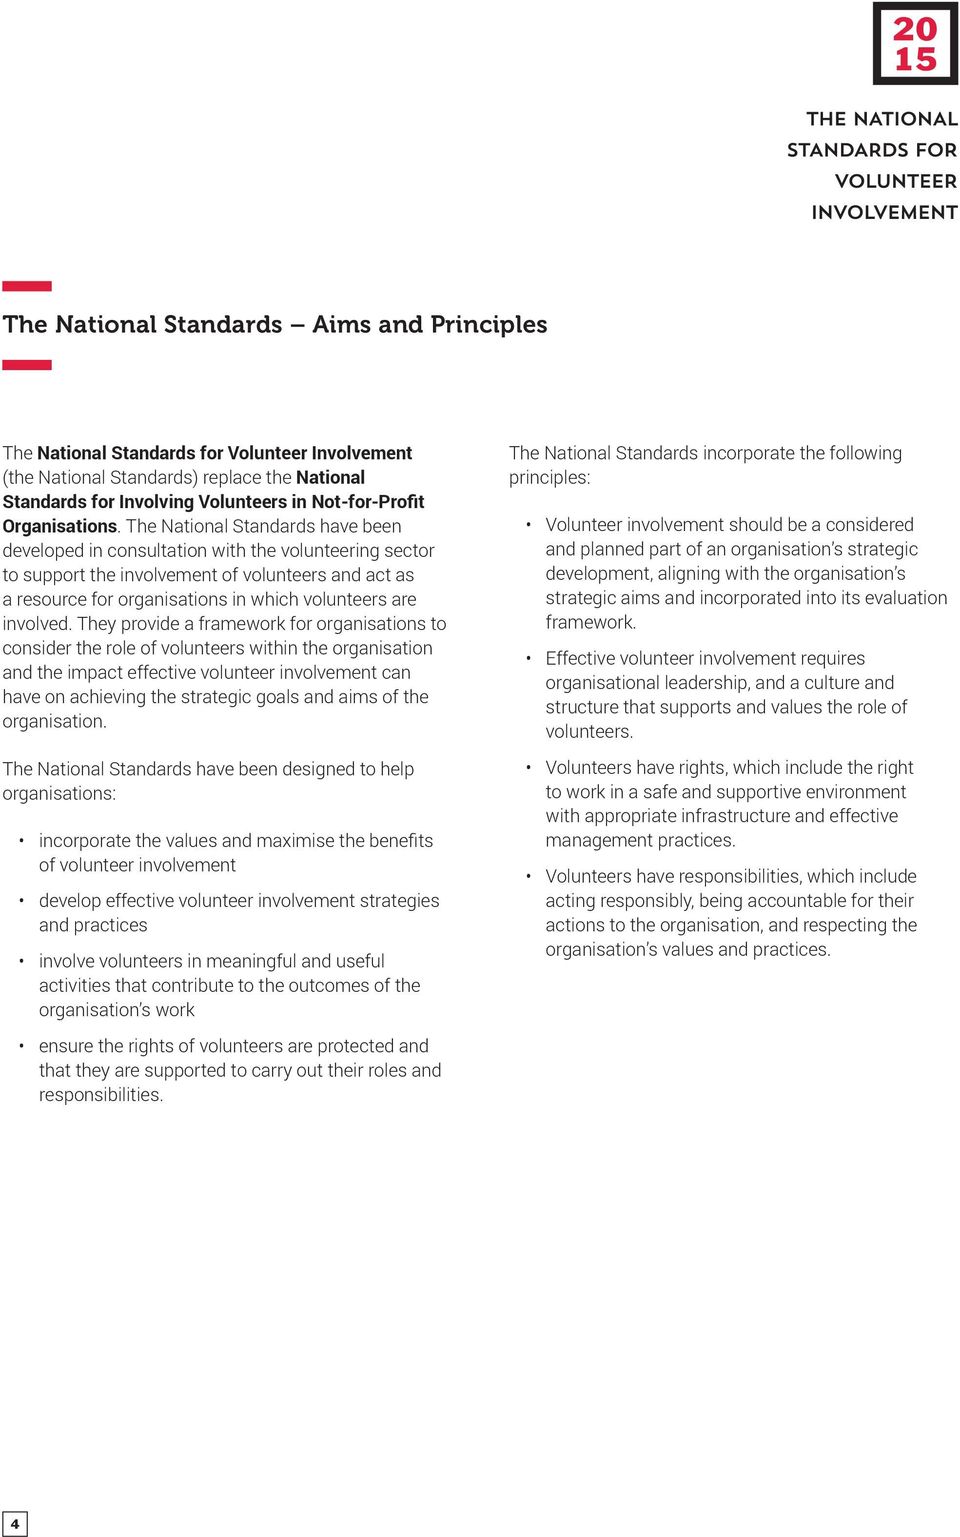 The National Standards have been developed in consultation with the volunteering sector to support the involvement of volunteers and act as a resource for organisations in which volunteers are